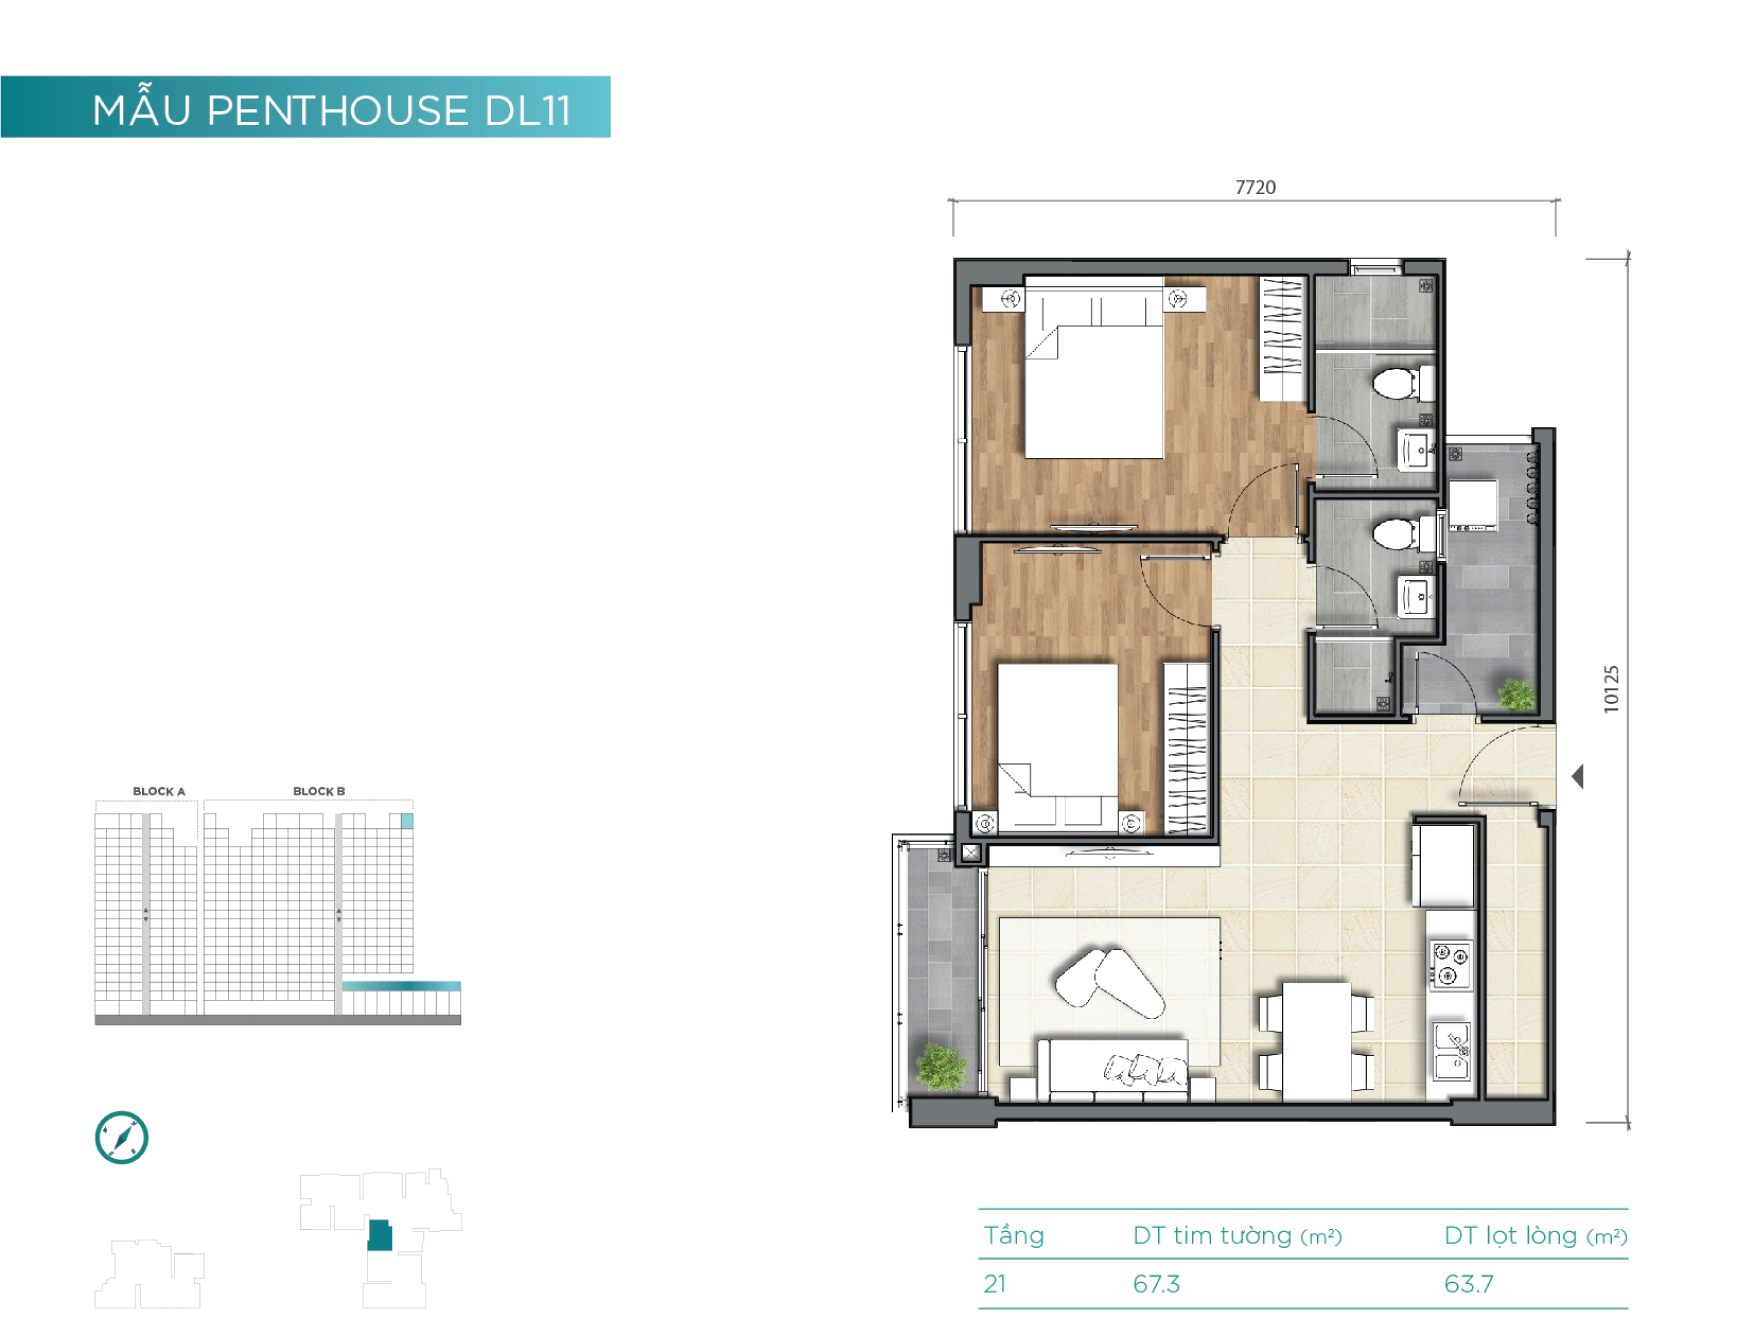 dlusso can penthouse 11